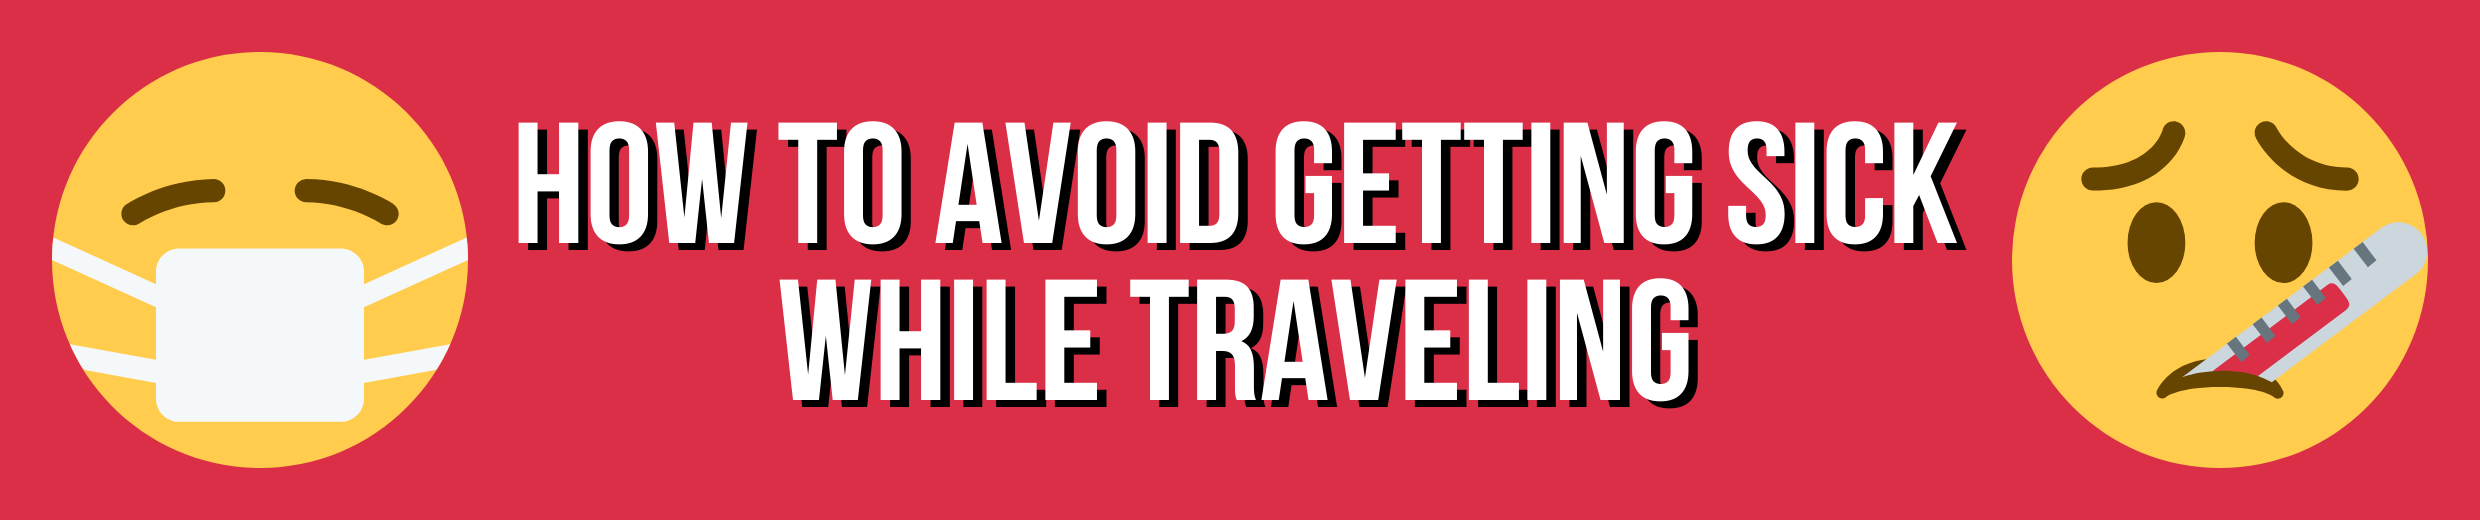 How to avoid getting sick while traveling